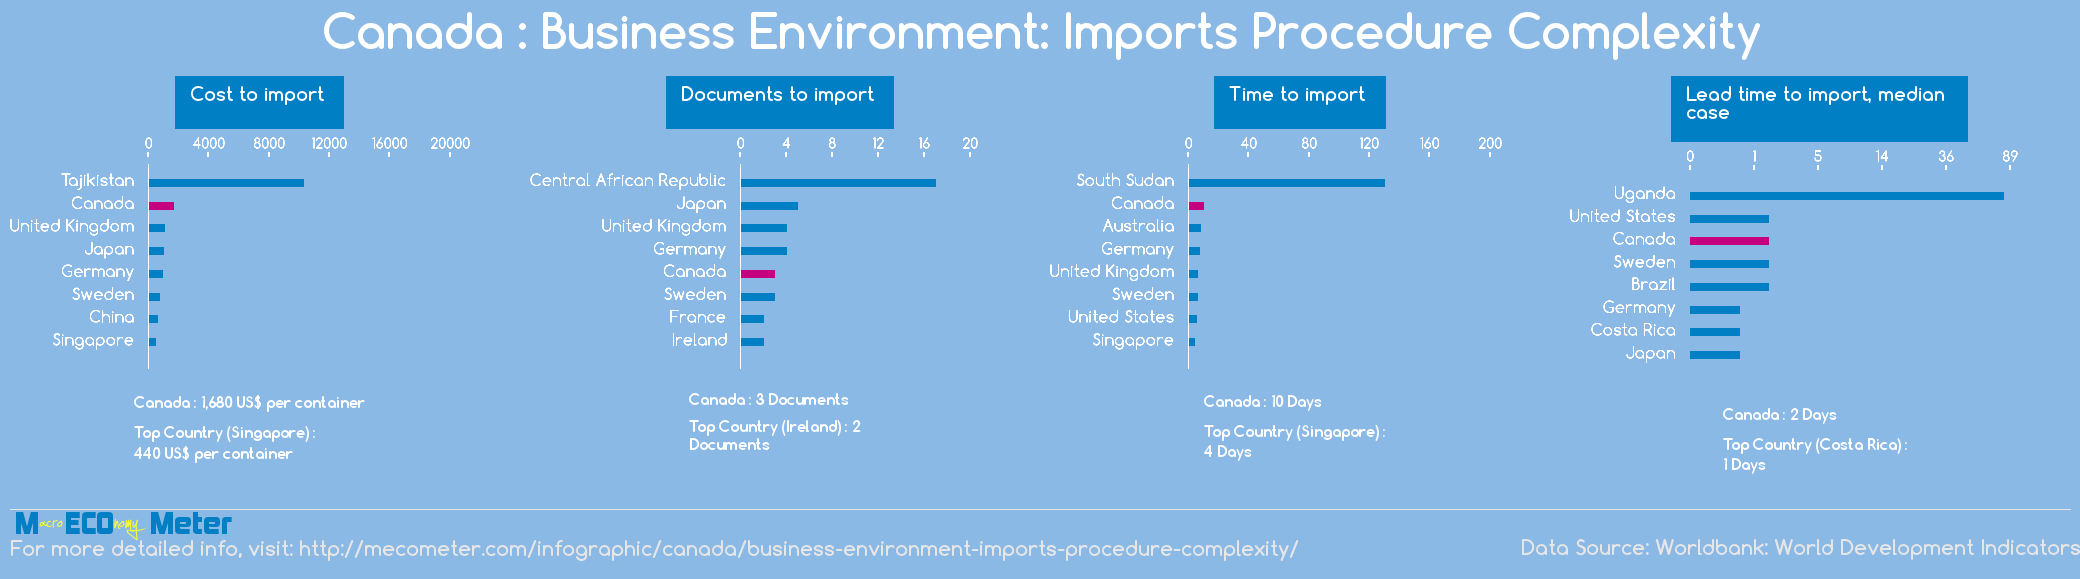 Canada : Business Environment: Imports Procedure Complexity